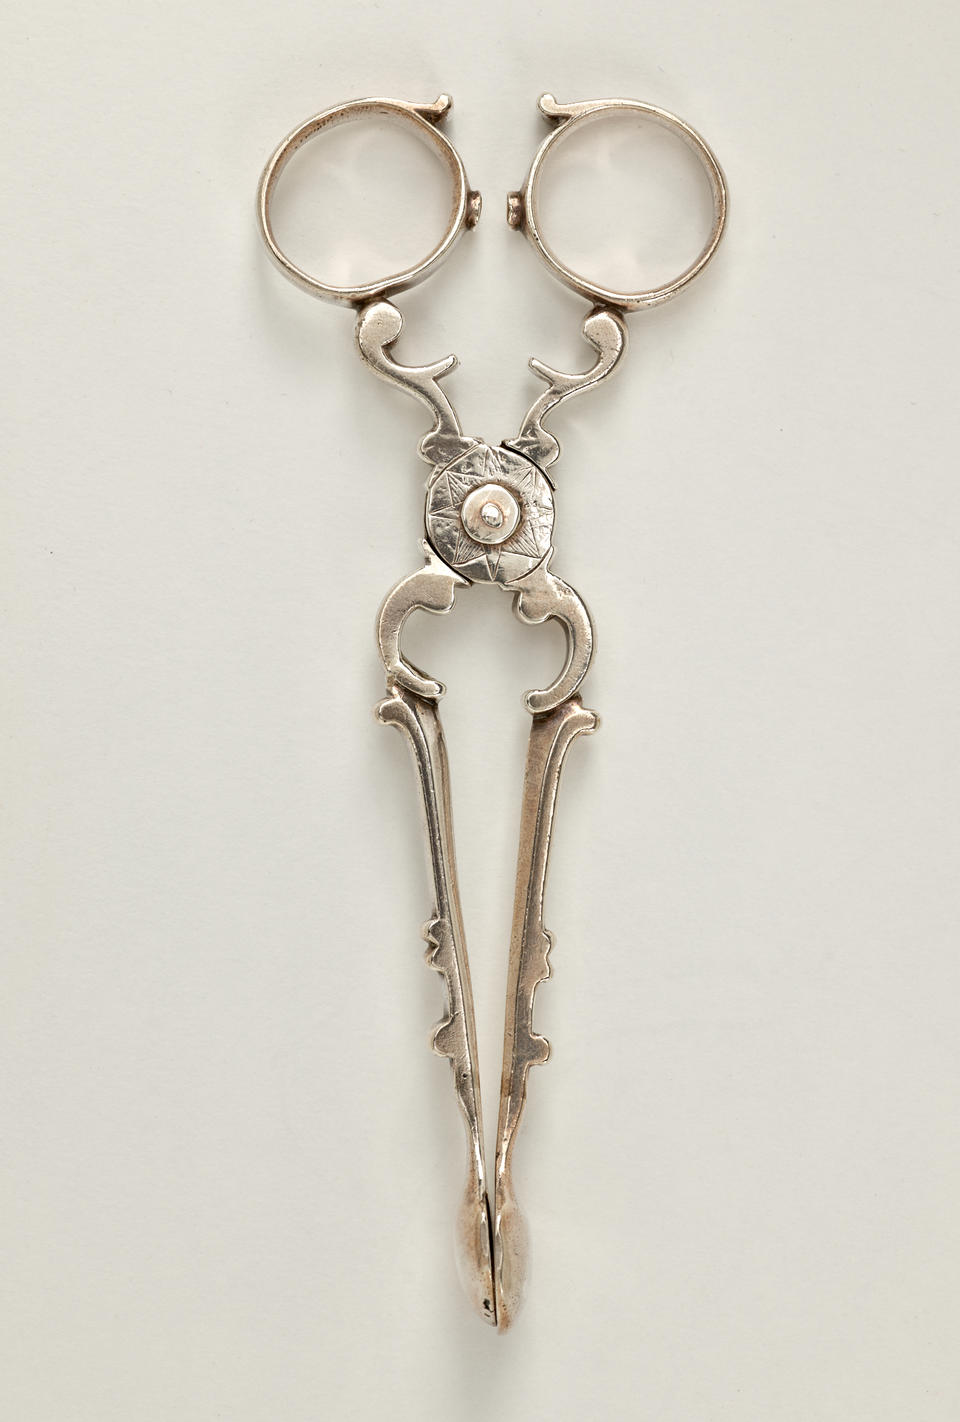 Silver sugar tongs that are delicate and swirled.